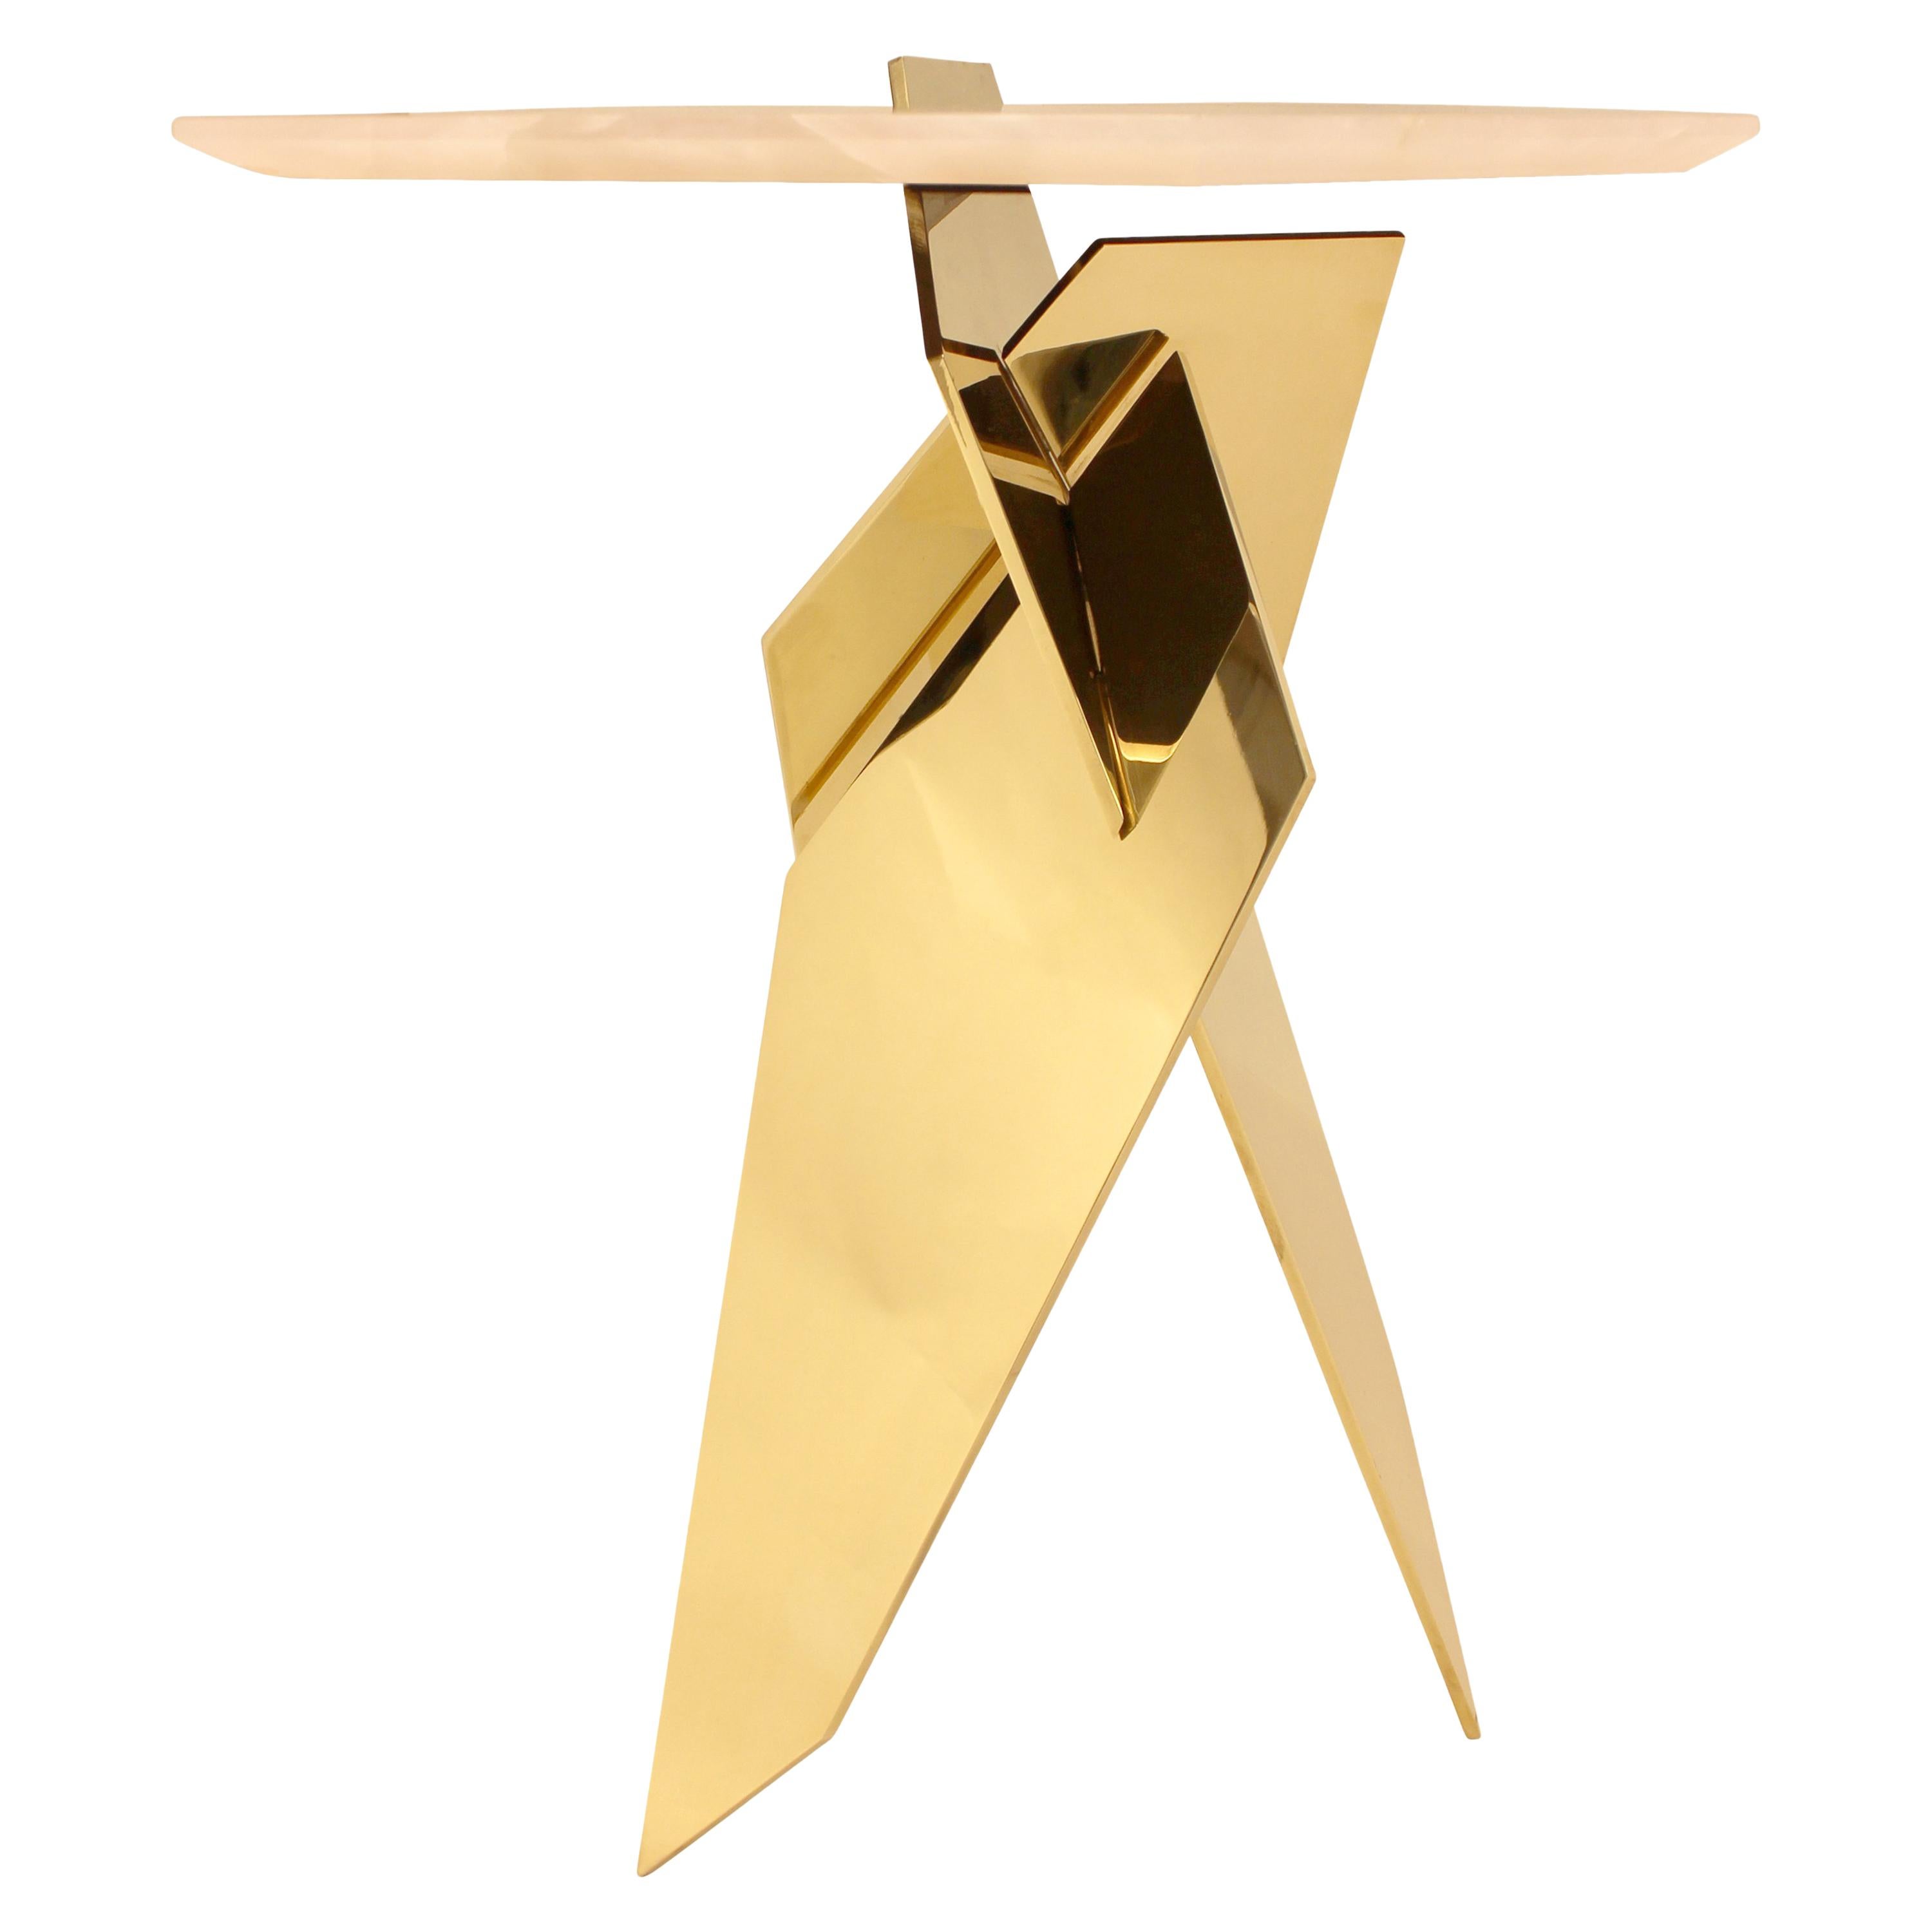 Sculptural Shard Table in Polished Bronze with Pink Onyx Top im Angebot